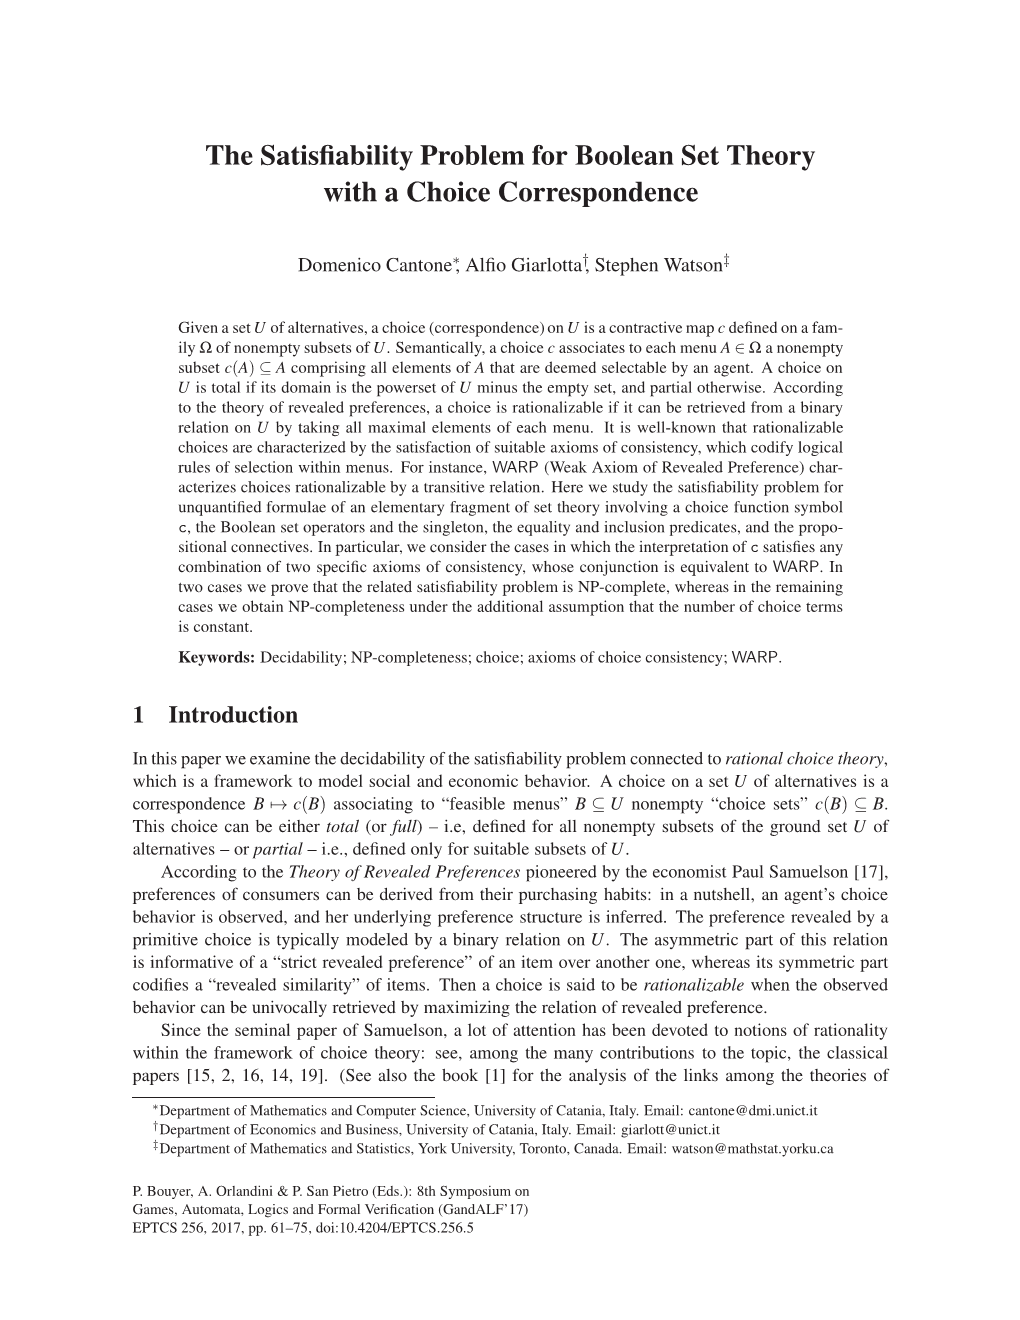 The Satisfiability Problem for Boolean Set Theory with a Choice